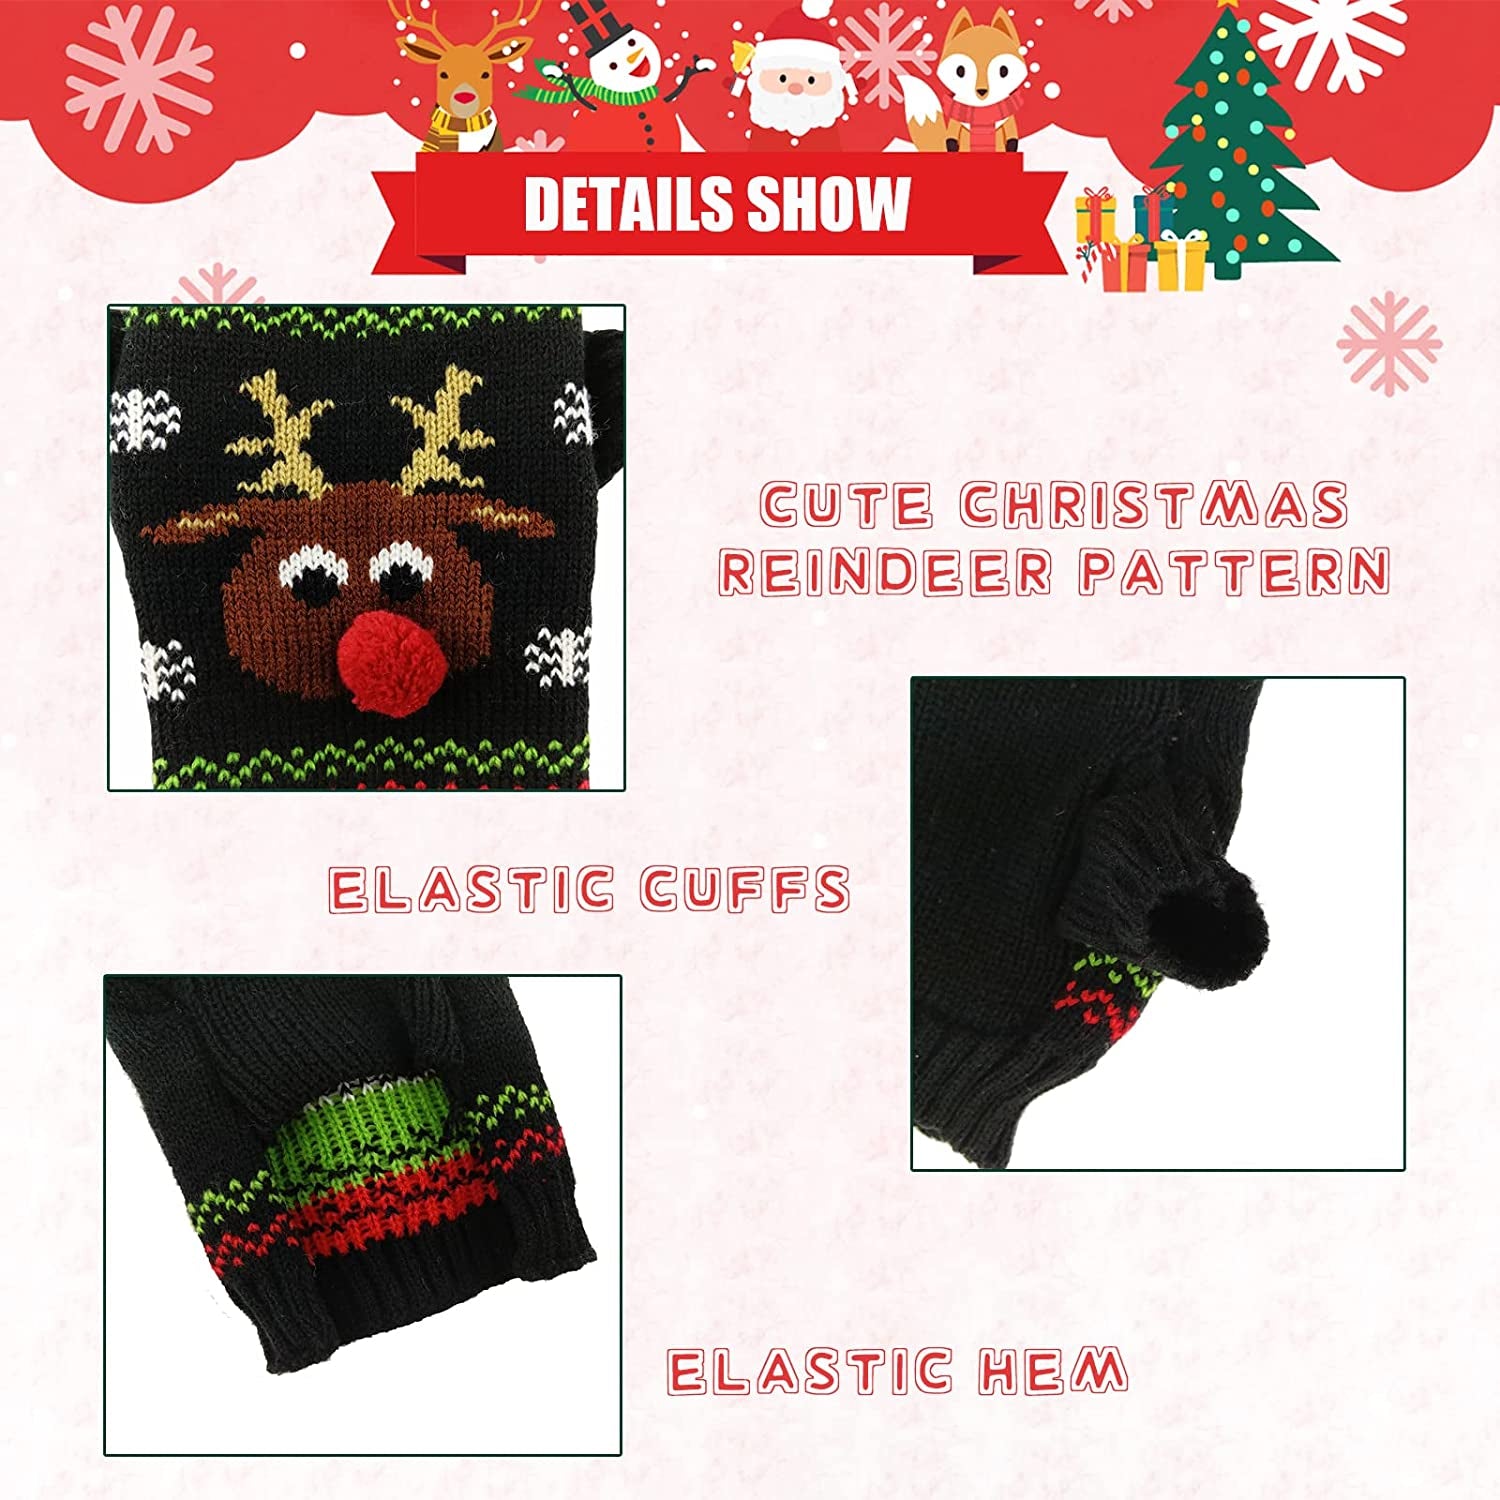 TENGZHI Dog Christmas Sweater Ugly Xmas Puppy Clothes Costume Warm Knitted Cat Outfit Jumper Cute Reindeer Pet Clothing for Small Medium Large Dogs Cats（S,Black） Animals & Pet Supplies > Pet Supplies > Dog Supplies > Dog Apparel Yi Wu Shi Teng Zhi Dian Zi Shang Wu You Xian Gong Si   